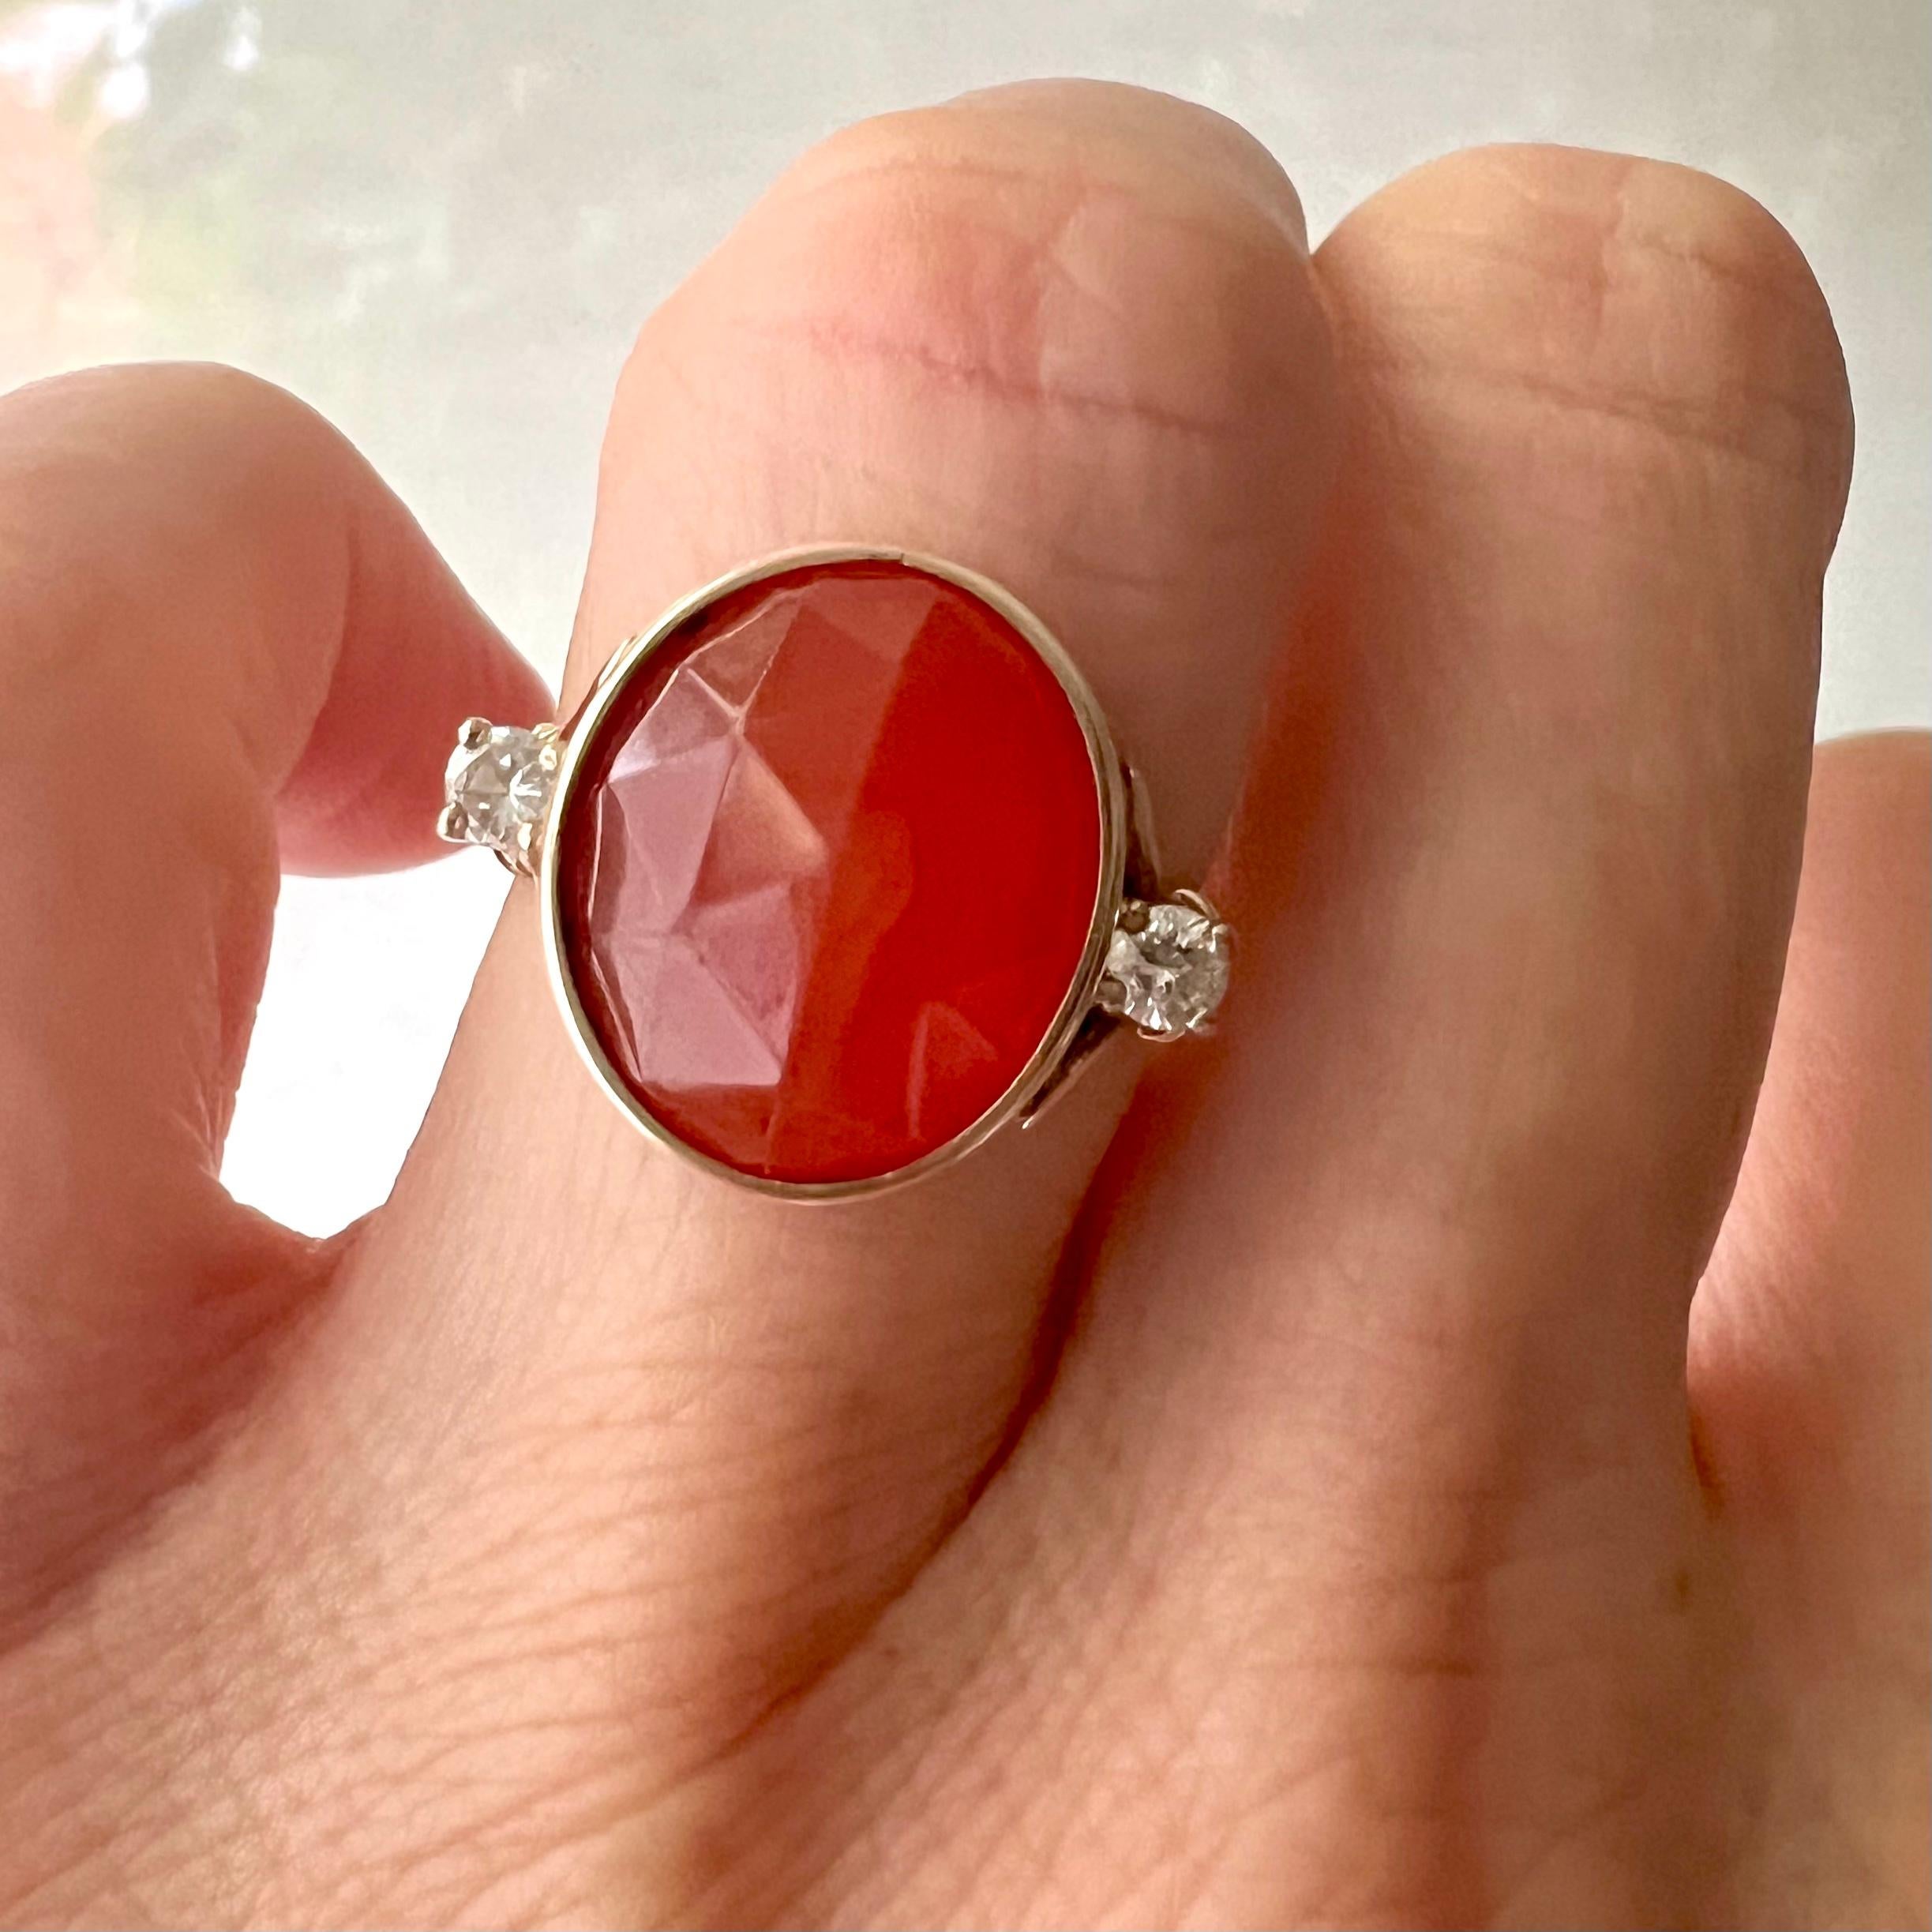 This Art Deco carnelian and diamond ring features a orangish translucent oval faceted carnelian created with a bright white brilliant cut diamond on either side of this beautiful ring. The diamonds are prong set and the shank of the ring is crafted